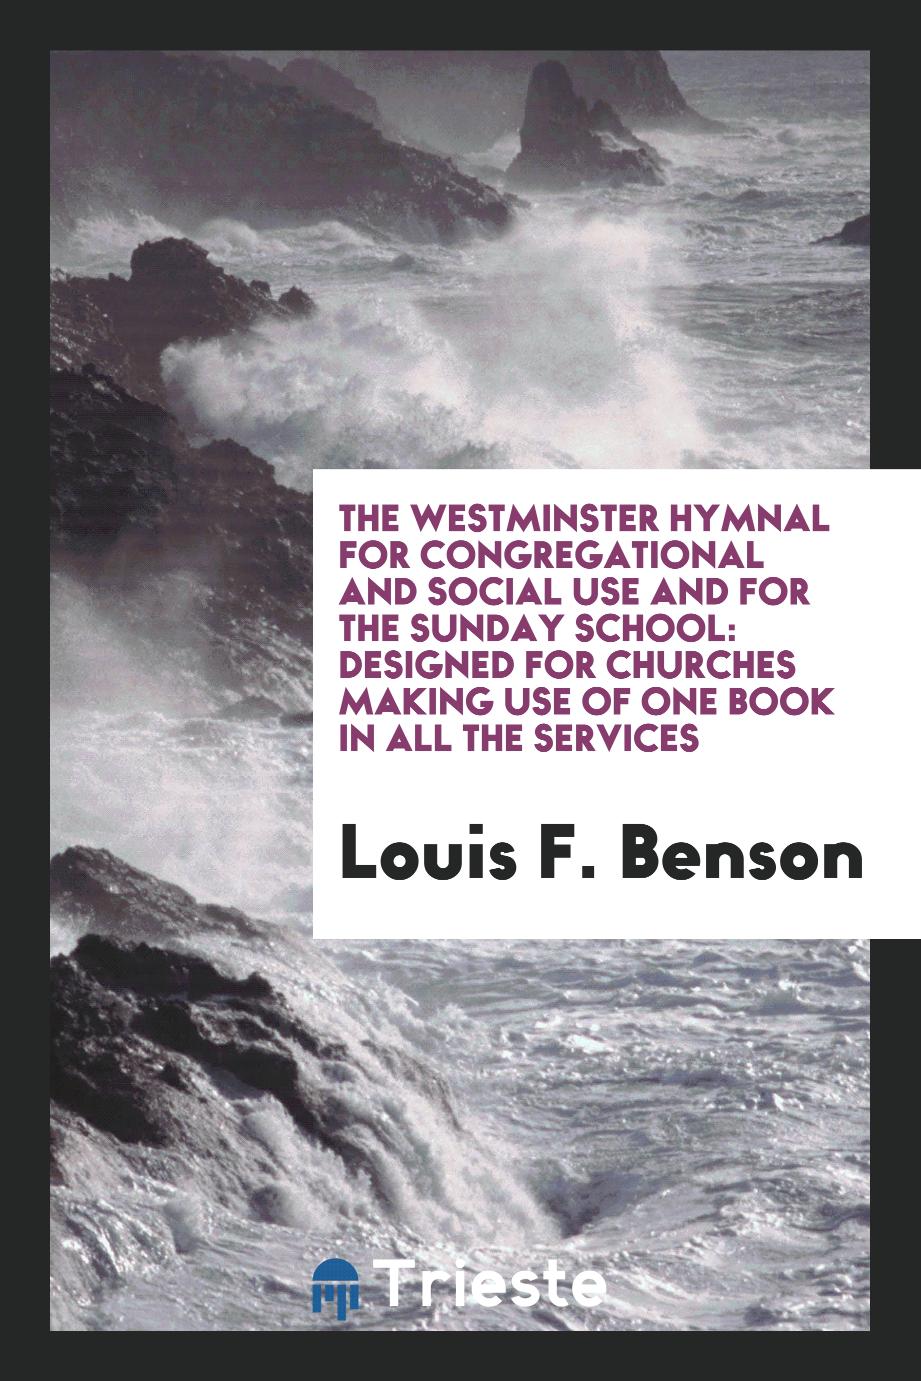 The Westminster Hymnal for Congregational and Social Use and for the Sunday School: Designed for Churches Making Use of One Book in All the Services